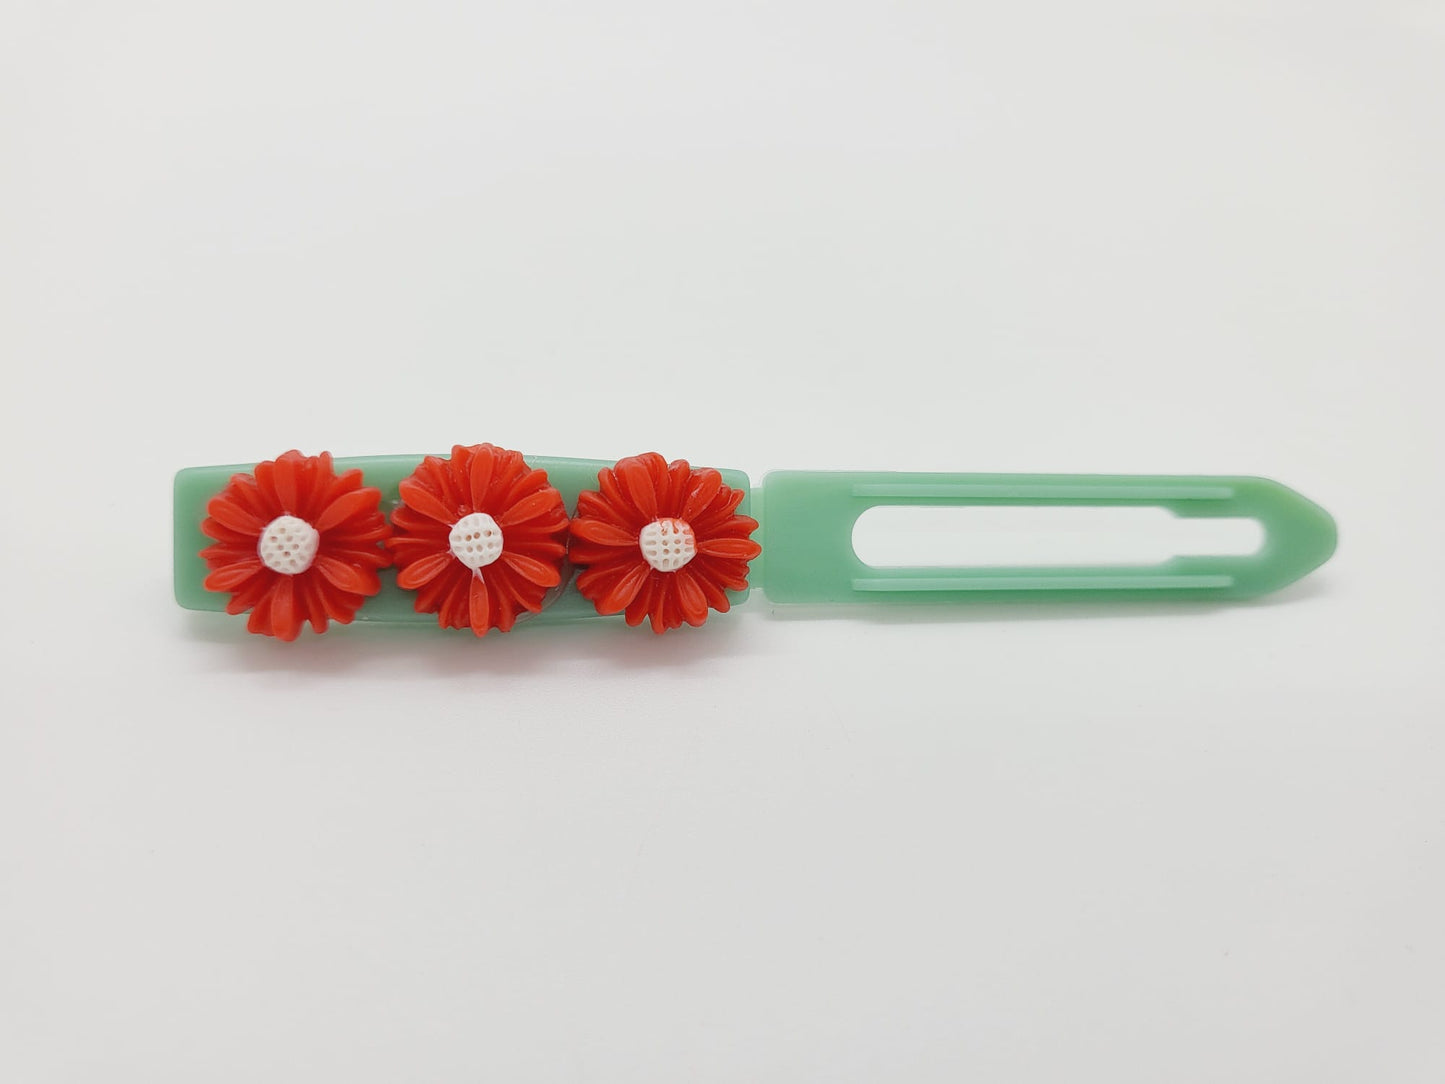 Red Daisy Chain Flower Top Knot Clip